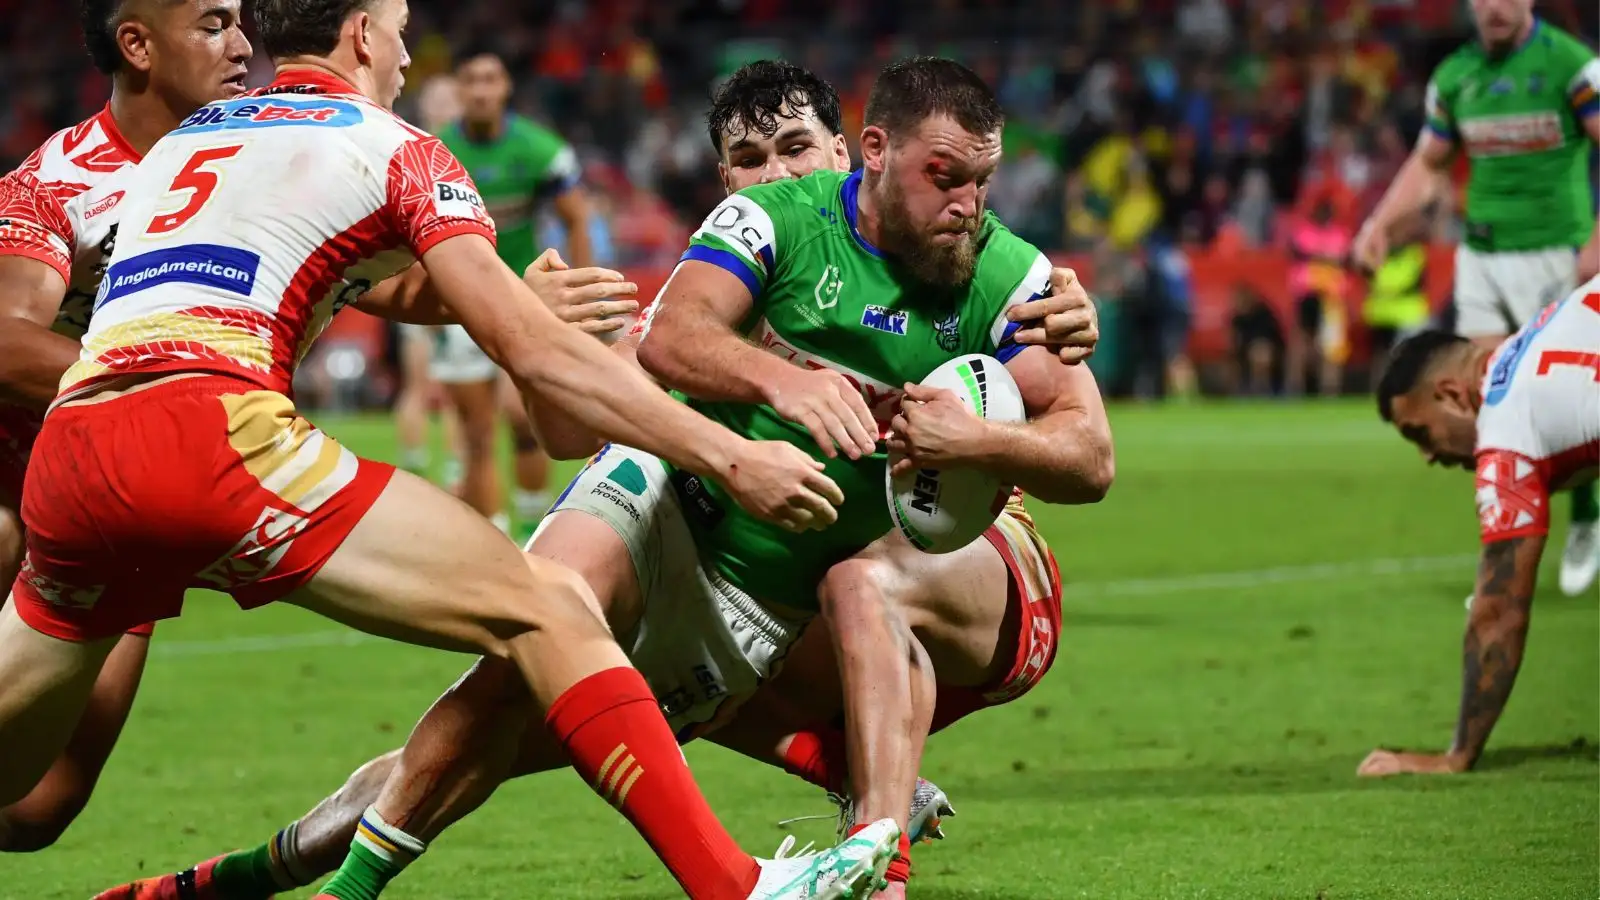 Canberra Raiders captain Elliott Whitehead’s first words after Super League return confirmed